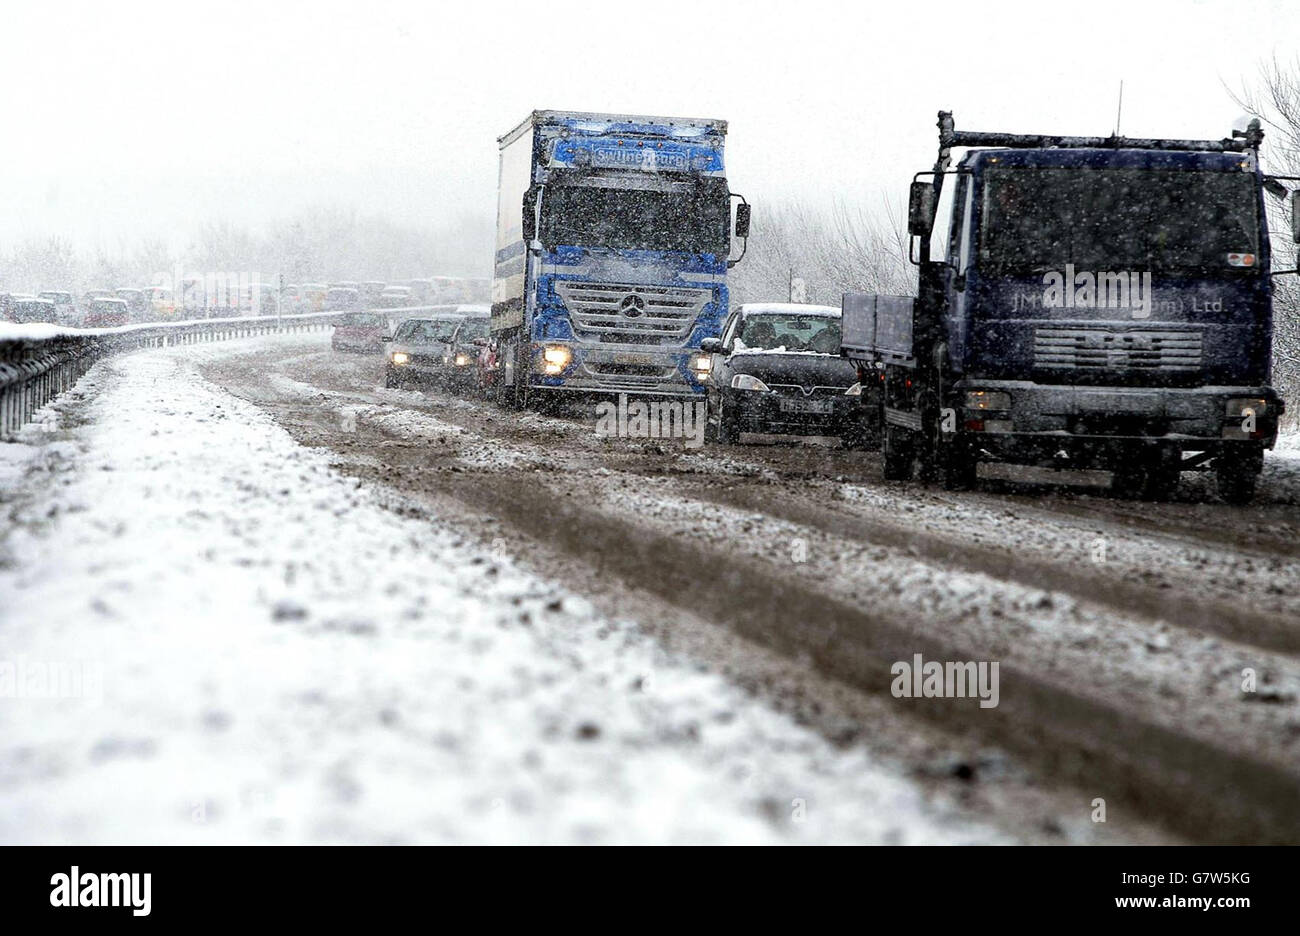 The A19 comes to a stand still, as Britain braced itself for a week of freezing weather with sleet and snow showers predicted across much of the country. Stock Photo